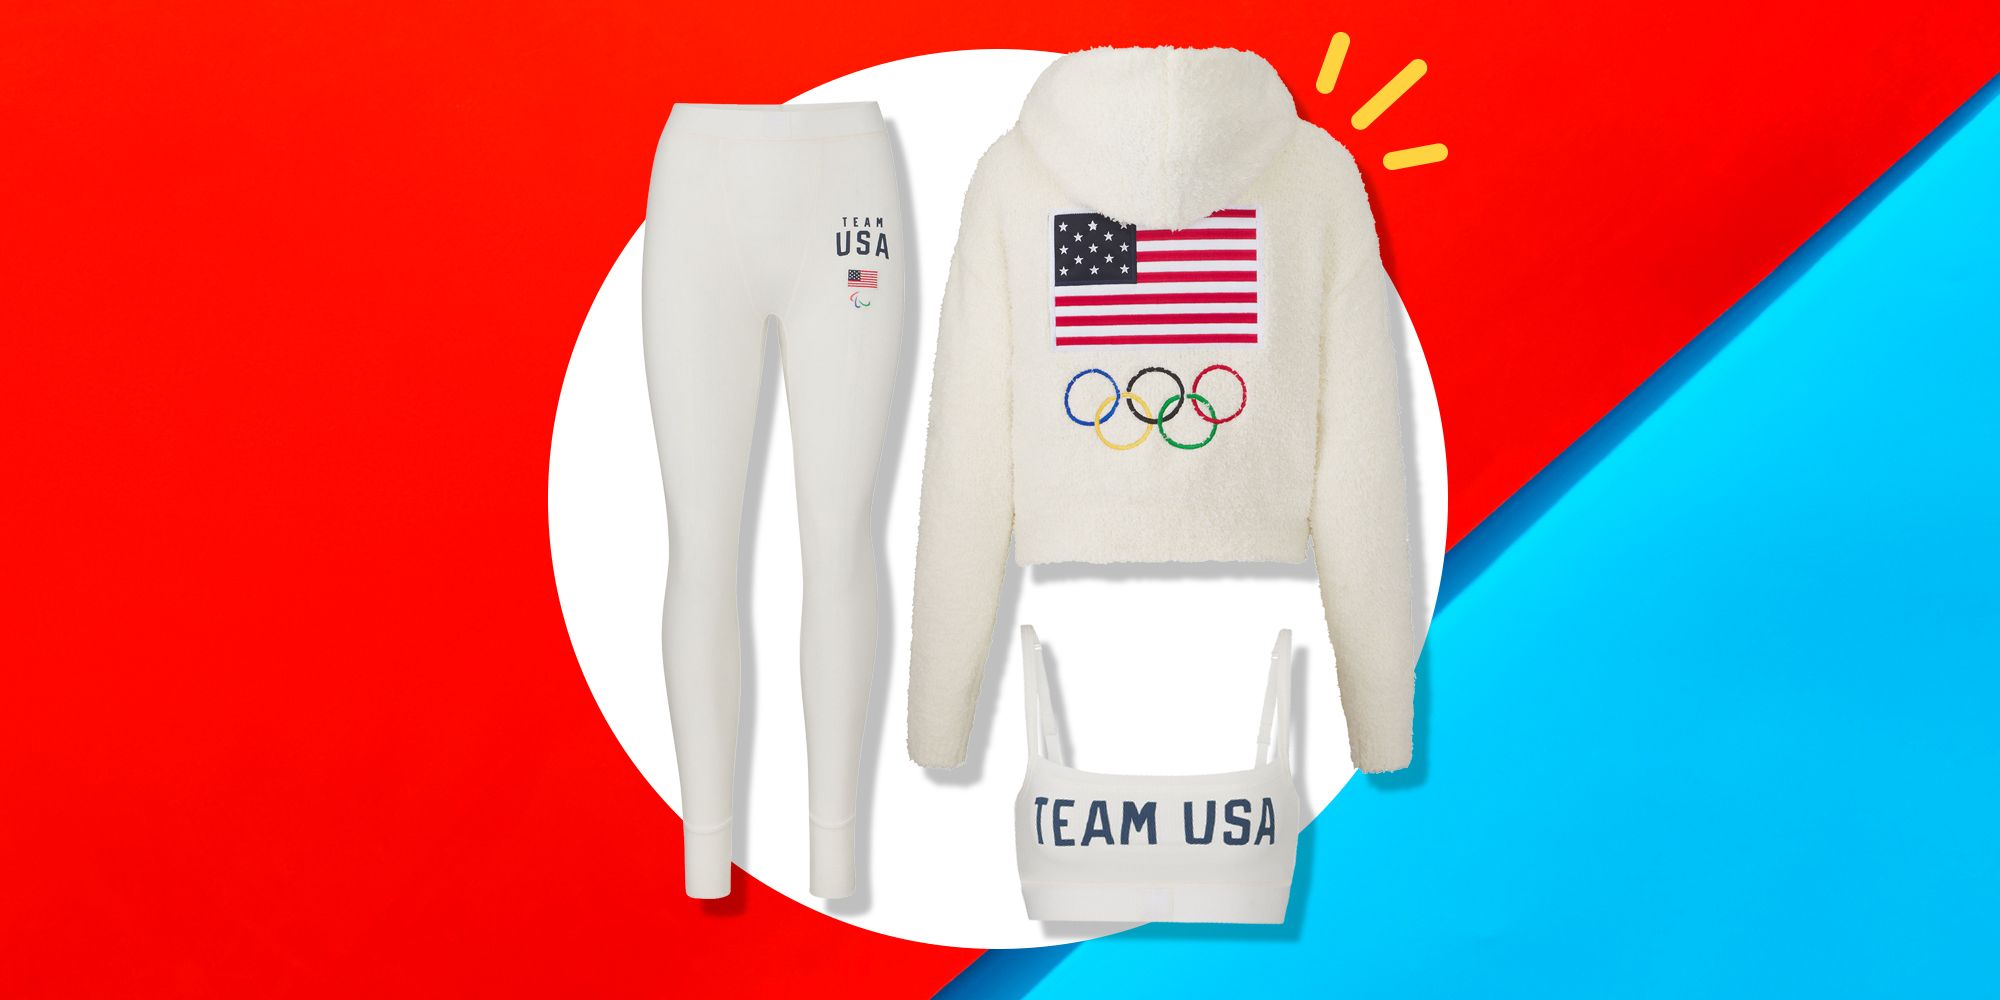 Kim Kardashian will outfit Team USA for the 2022 Olympics